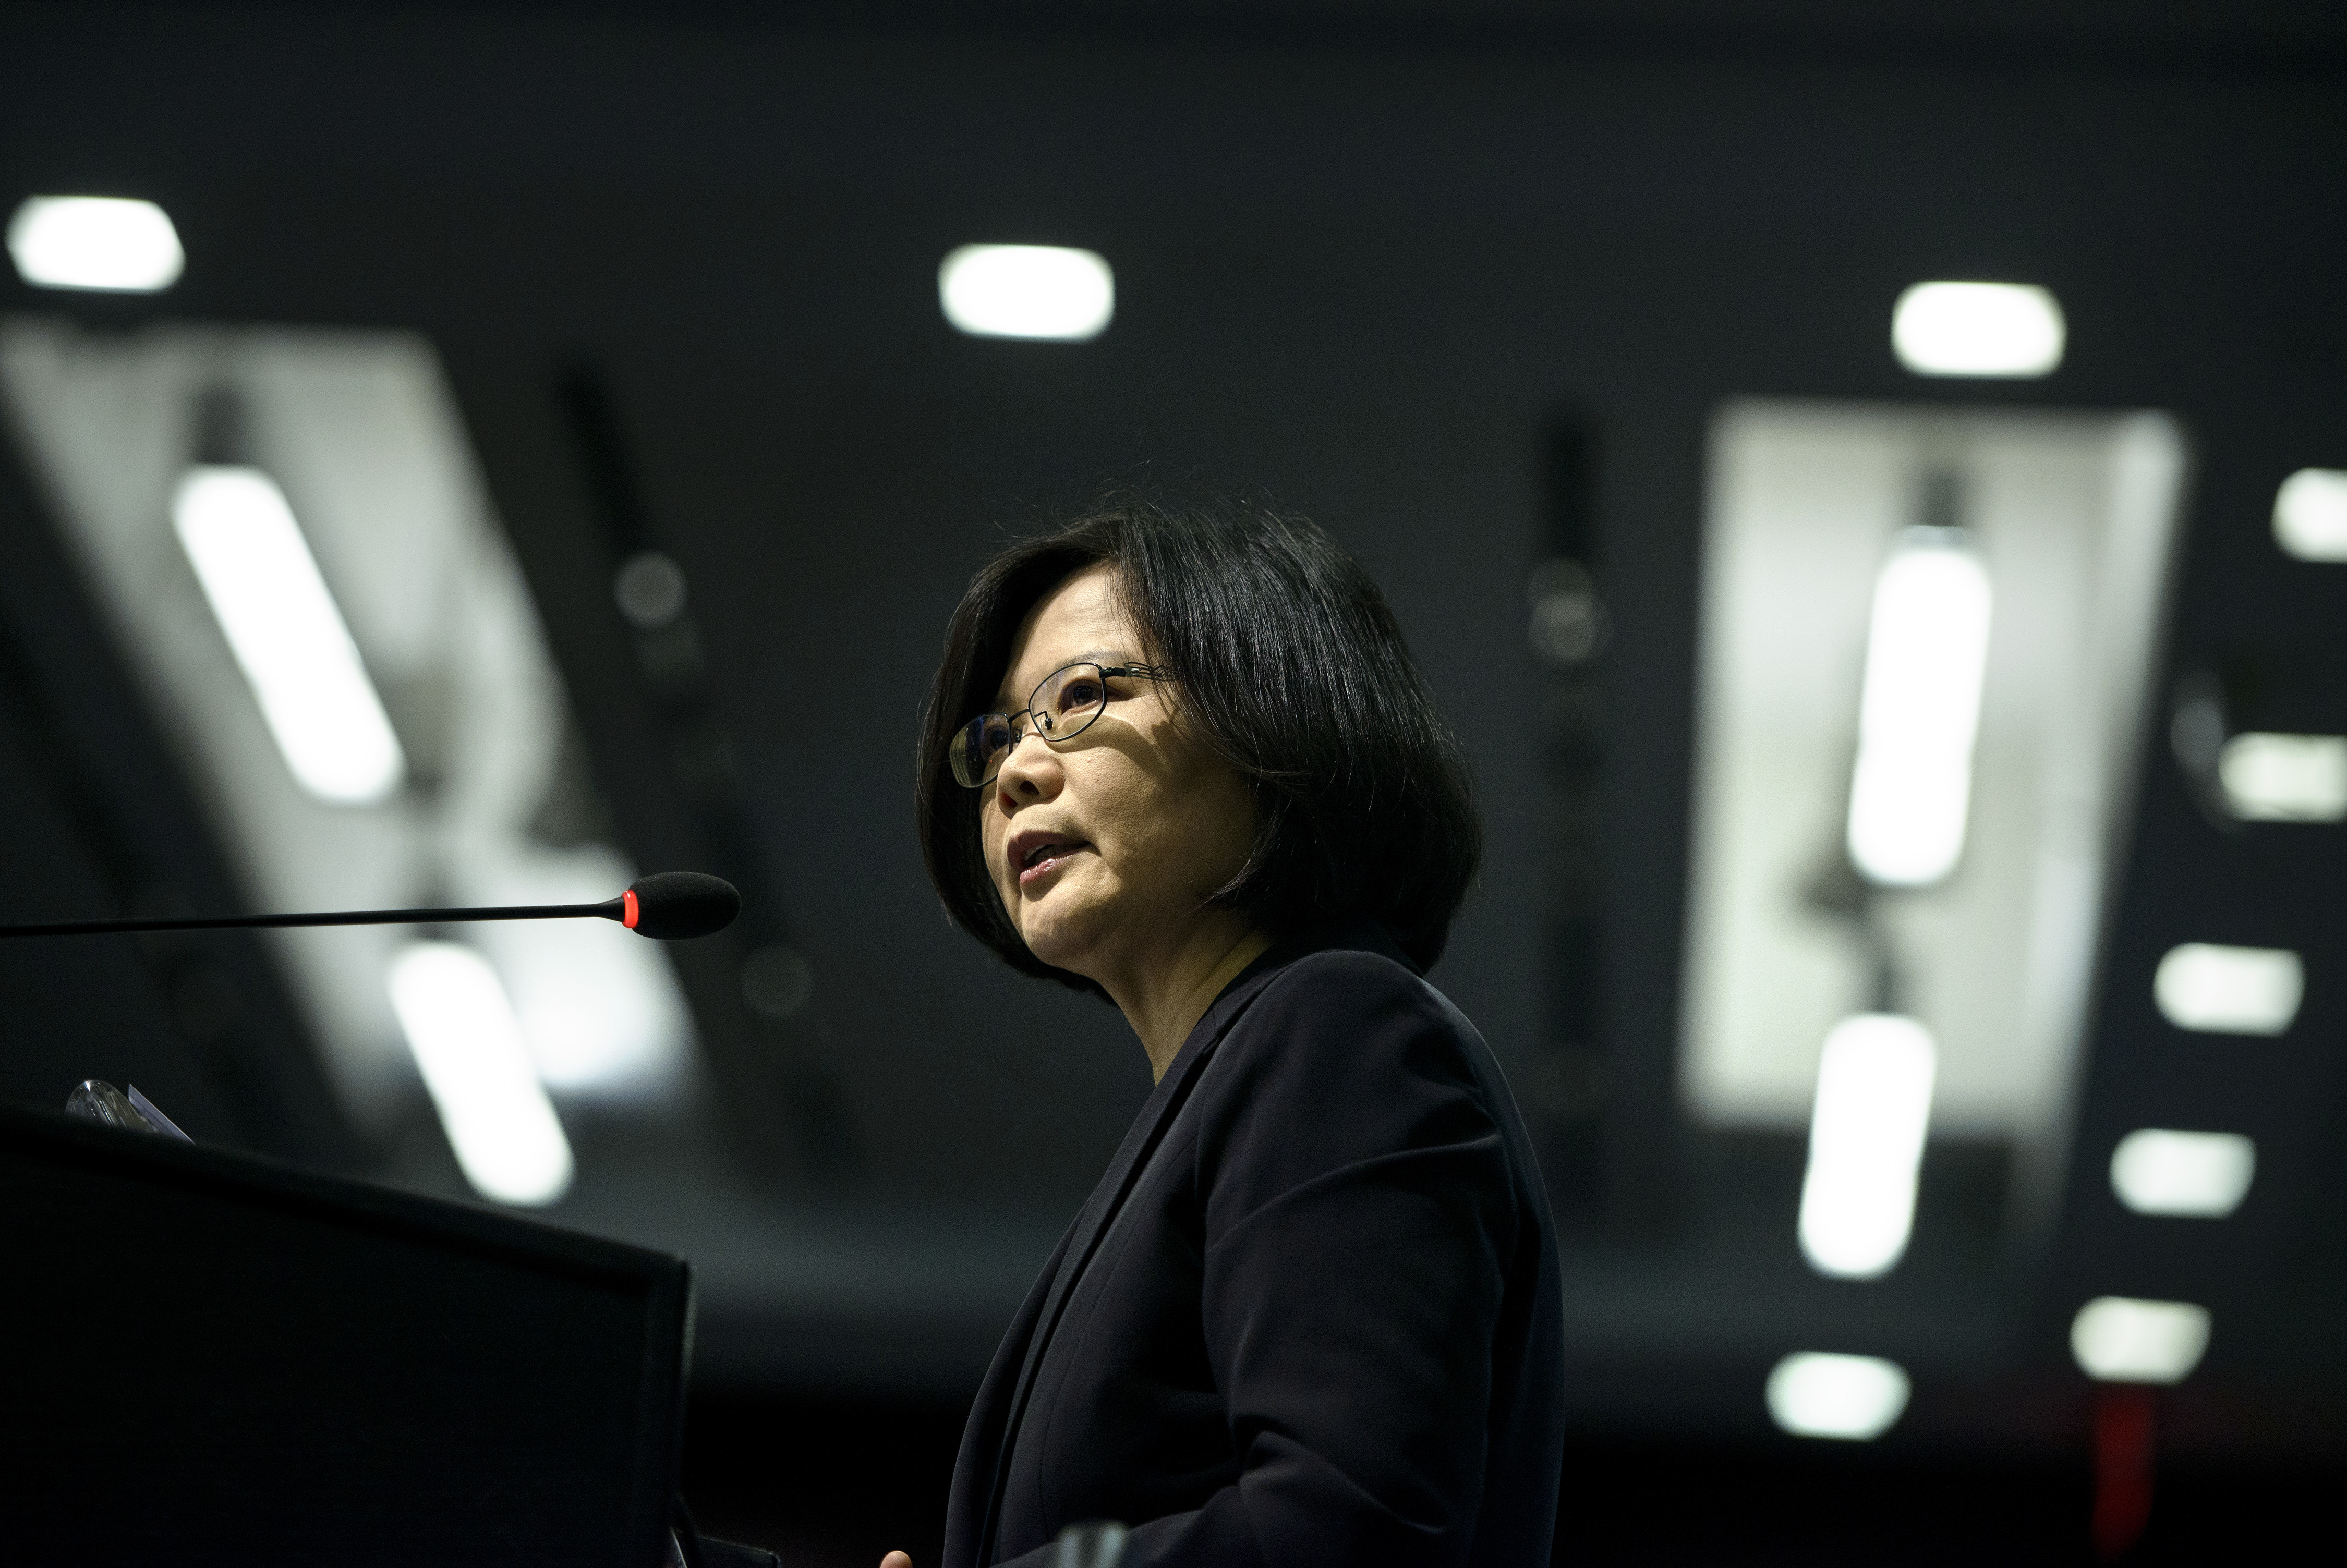 Dr. Tsai Ing-wen, Chair of Taiwan's Democratic Progressive Party and a presidential nominee, speaks during an event at the Center for Strategic and International Studies June 3, 2015 in Washington, DC. AFP PHOTO/BRENDAN SMIALOWSKI / AFP / BRENDAN SMIALOWSKI